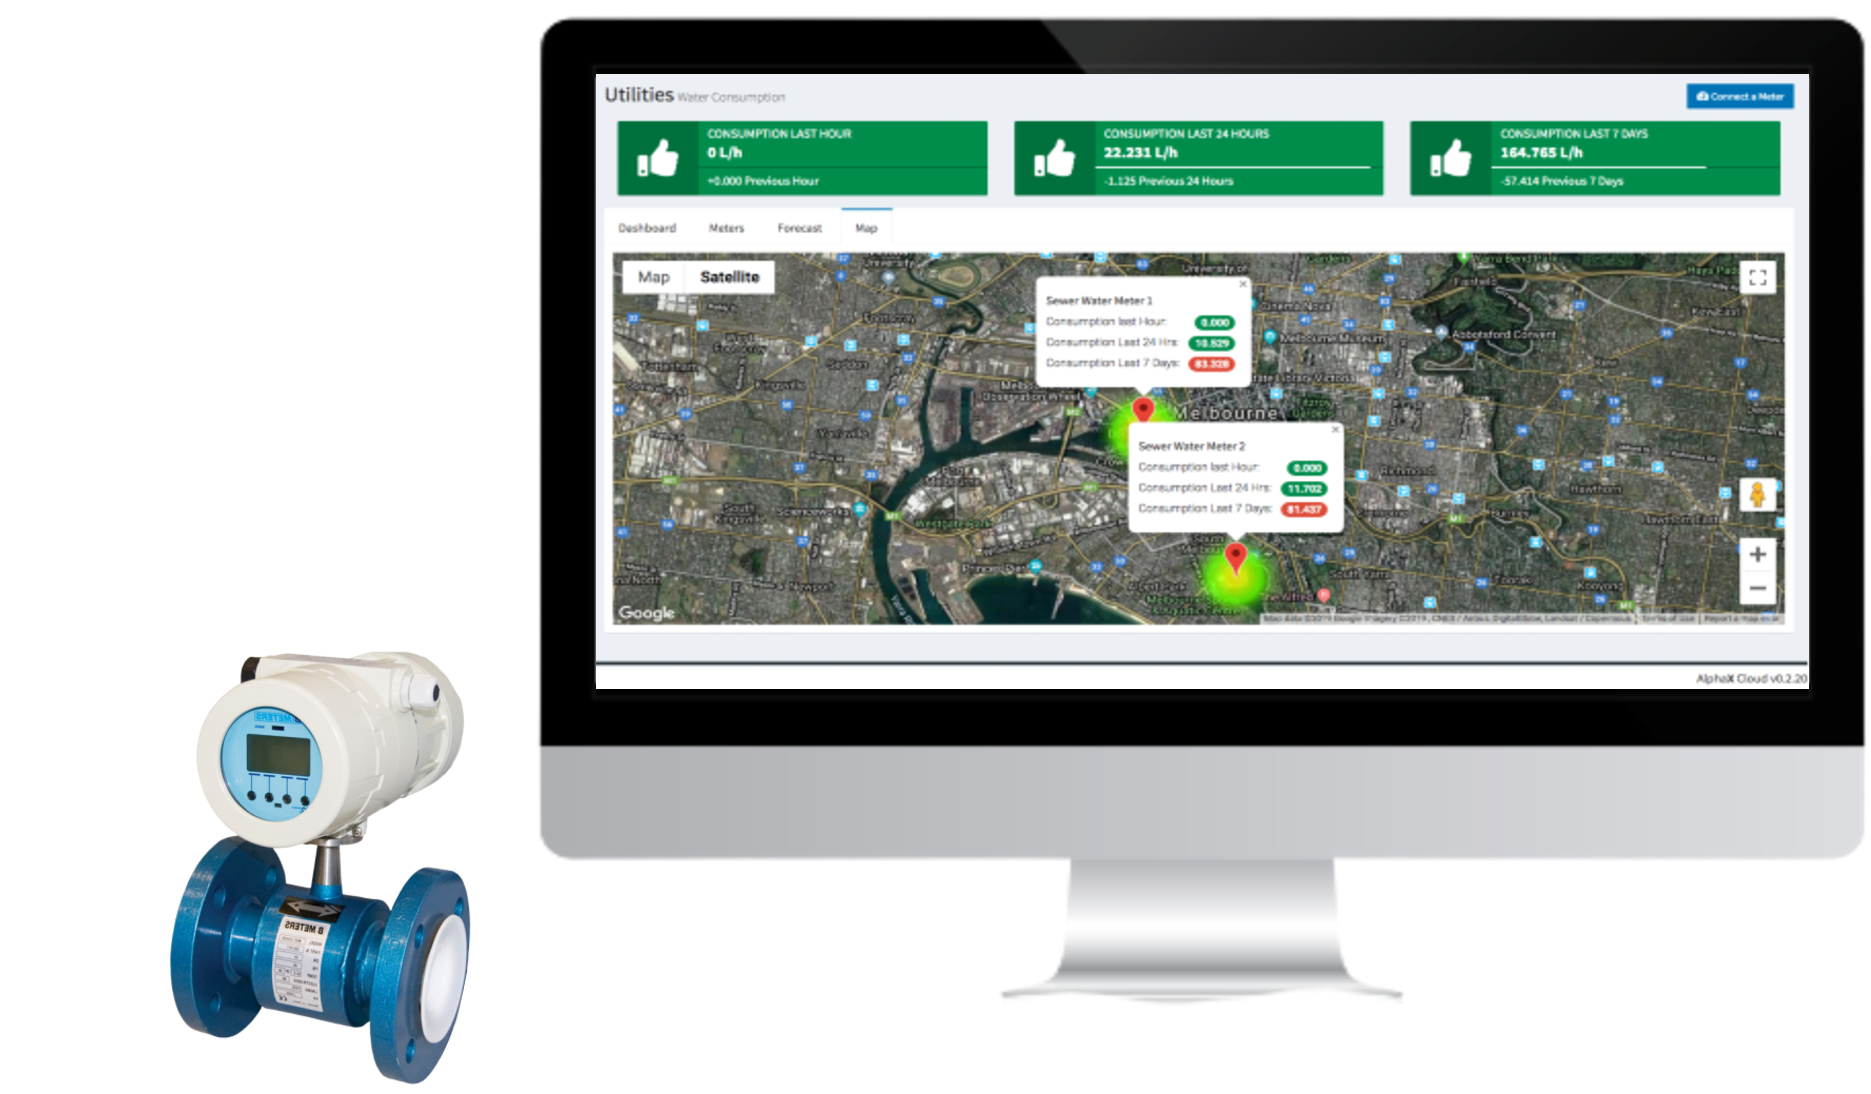 Utility Management System provides you with the live feed and useful insights.